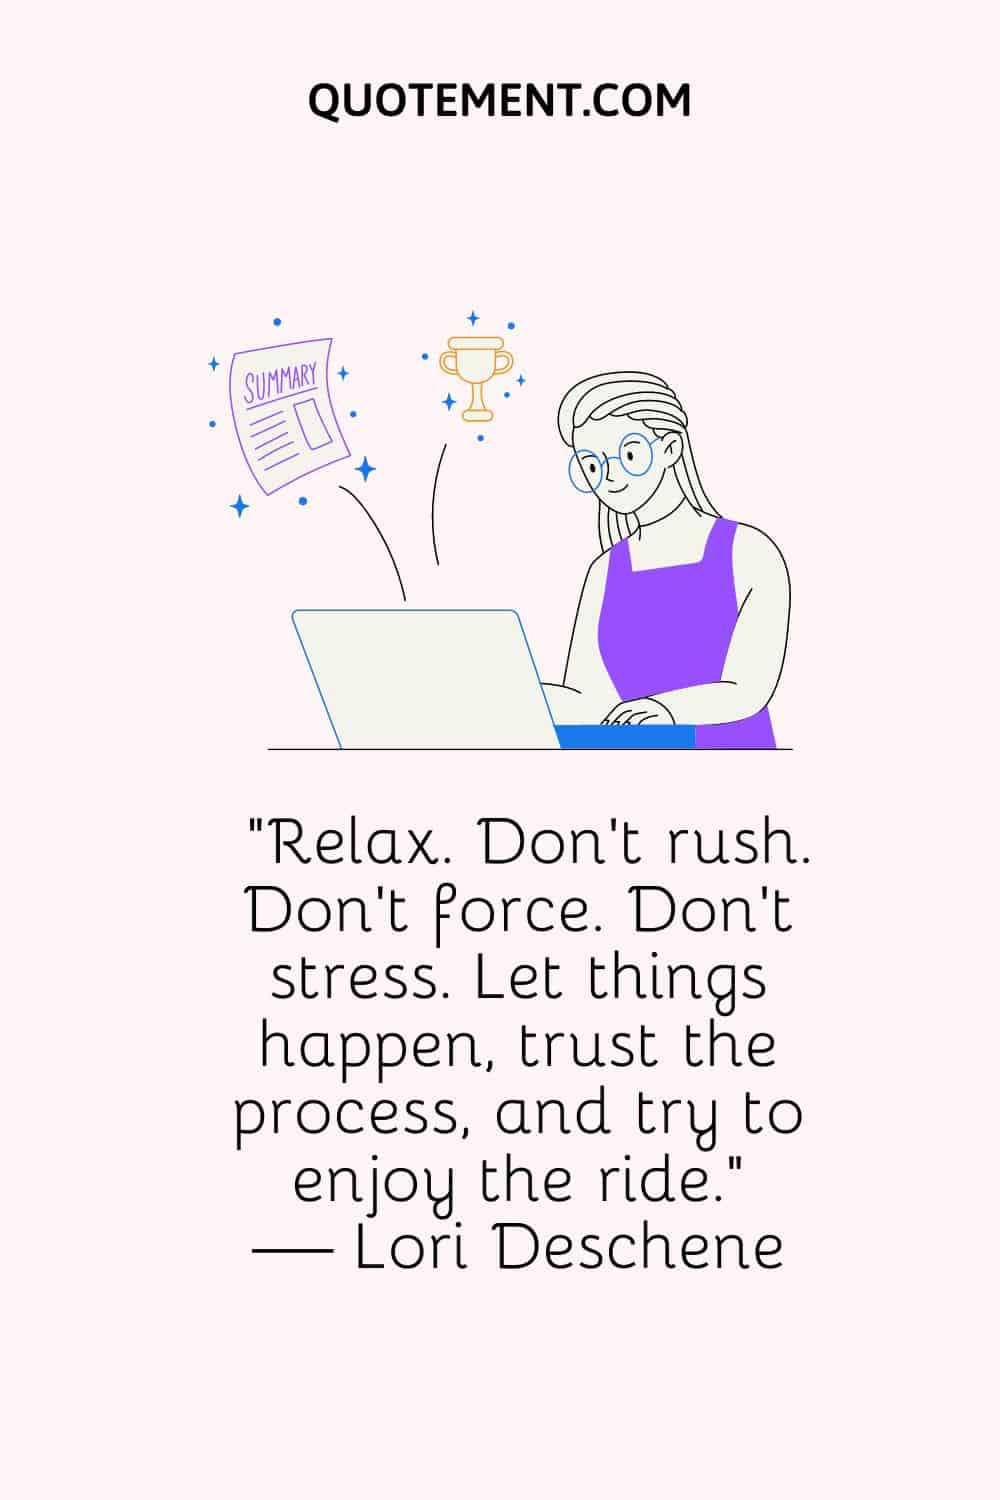 Relax. Don’t rush. Don’t force